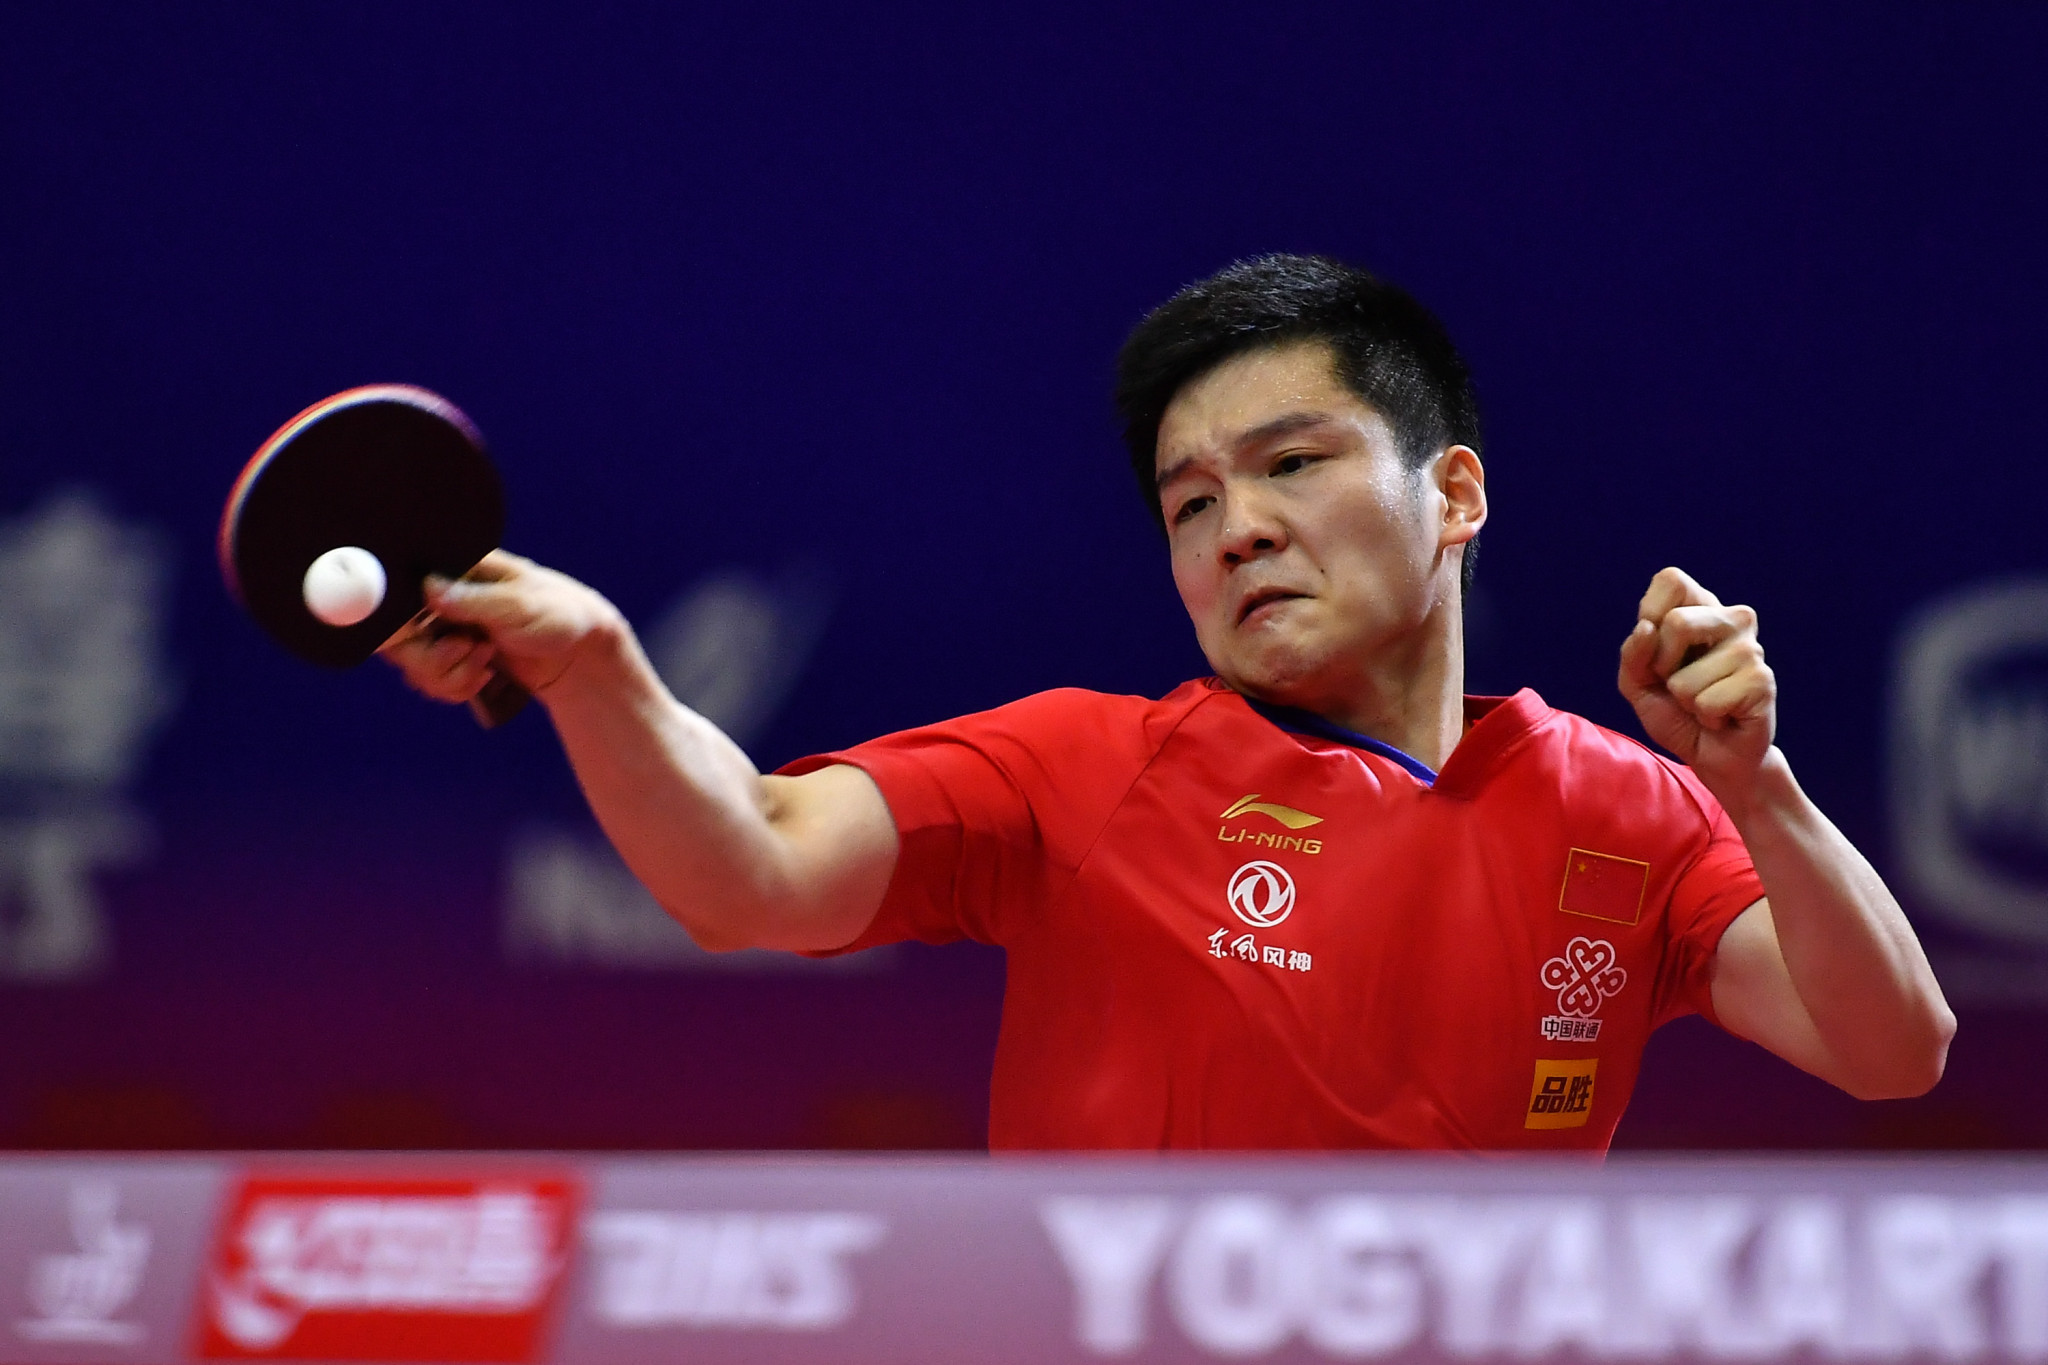 Fan Zhendong eased into the quarter-finals ©Getty Images